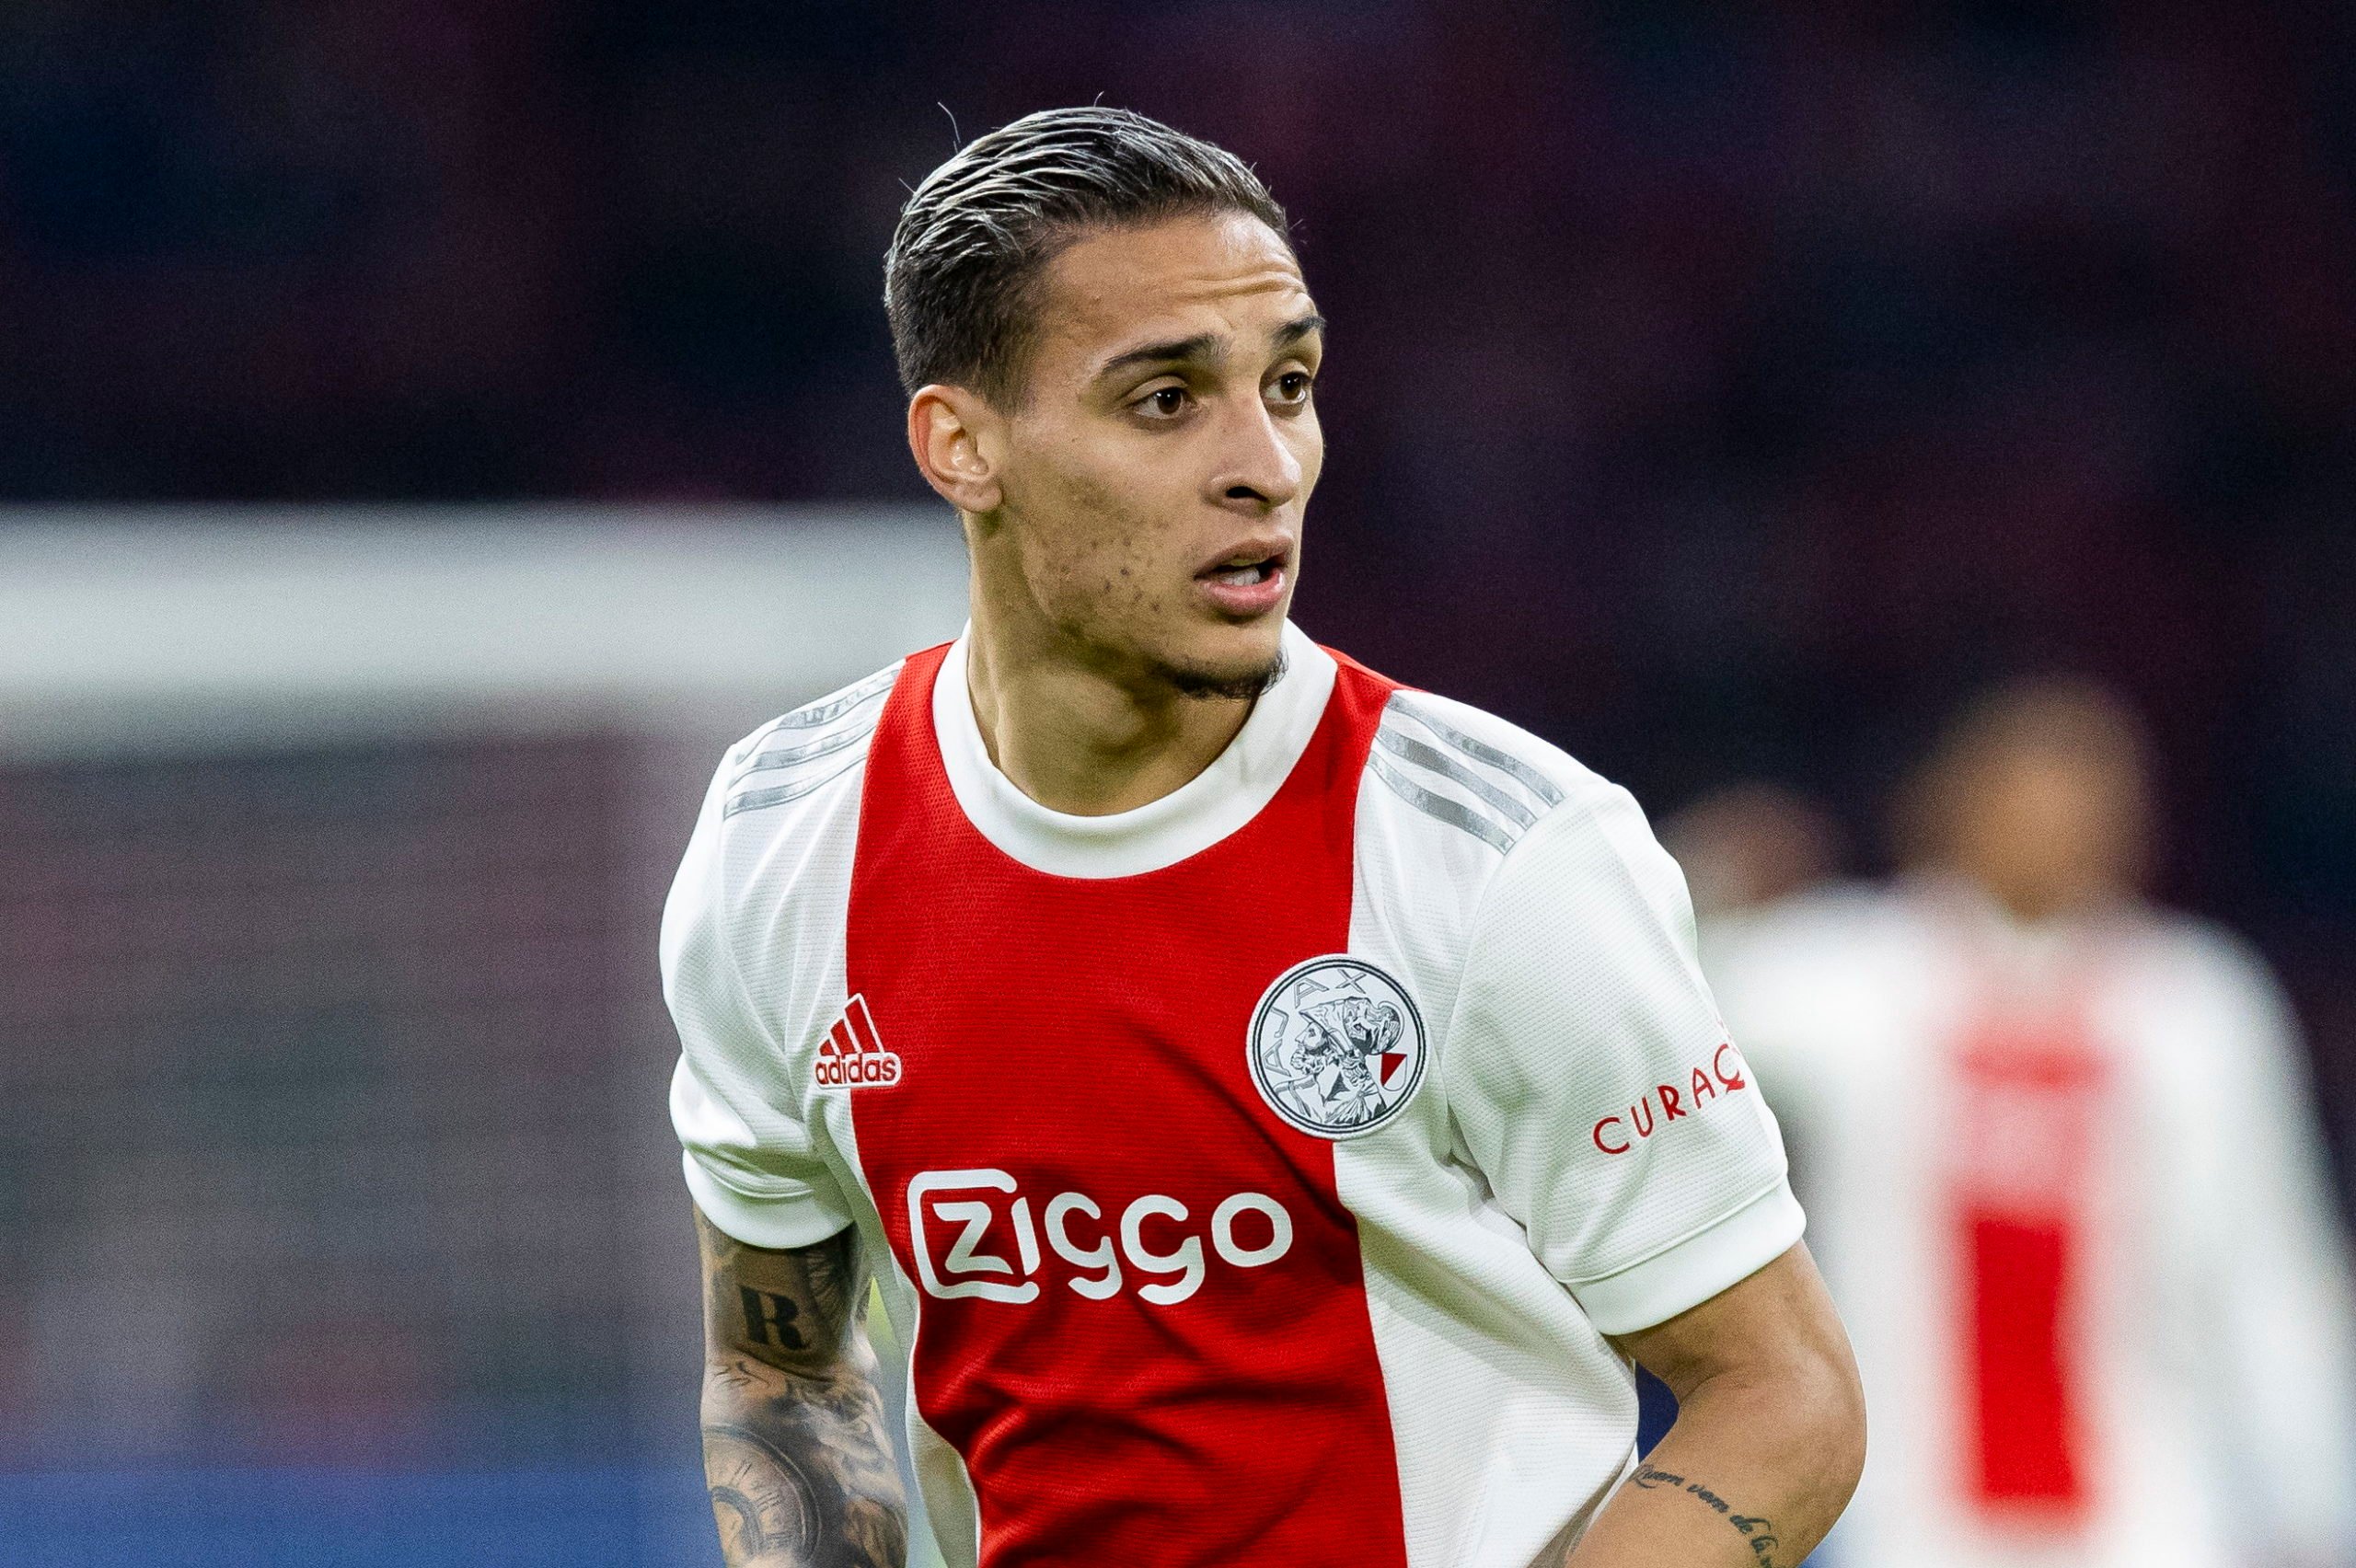 Antony unhappy and feels Ajax transfer fee is 'disproportionate'